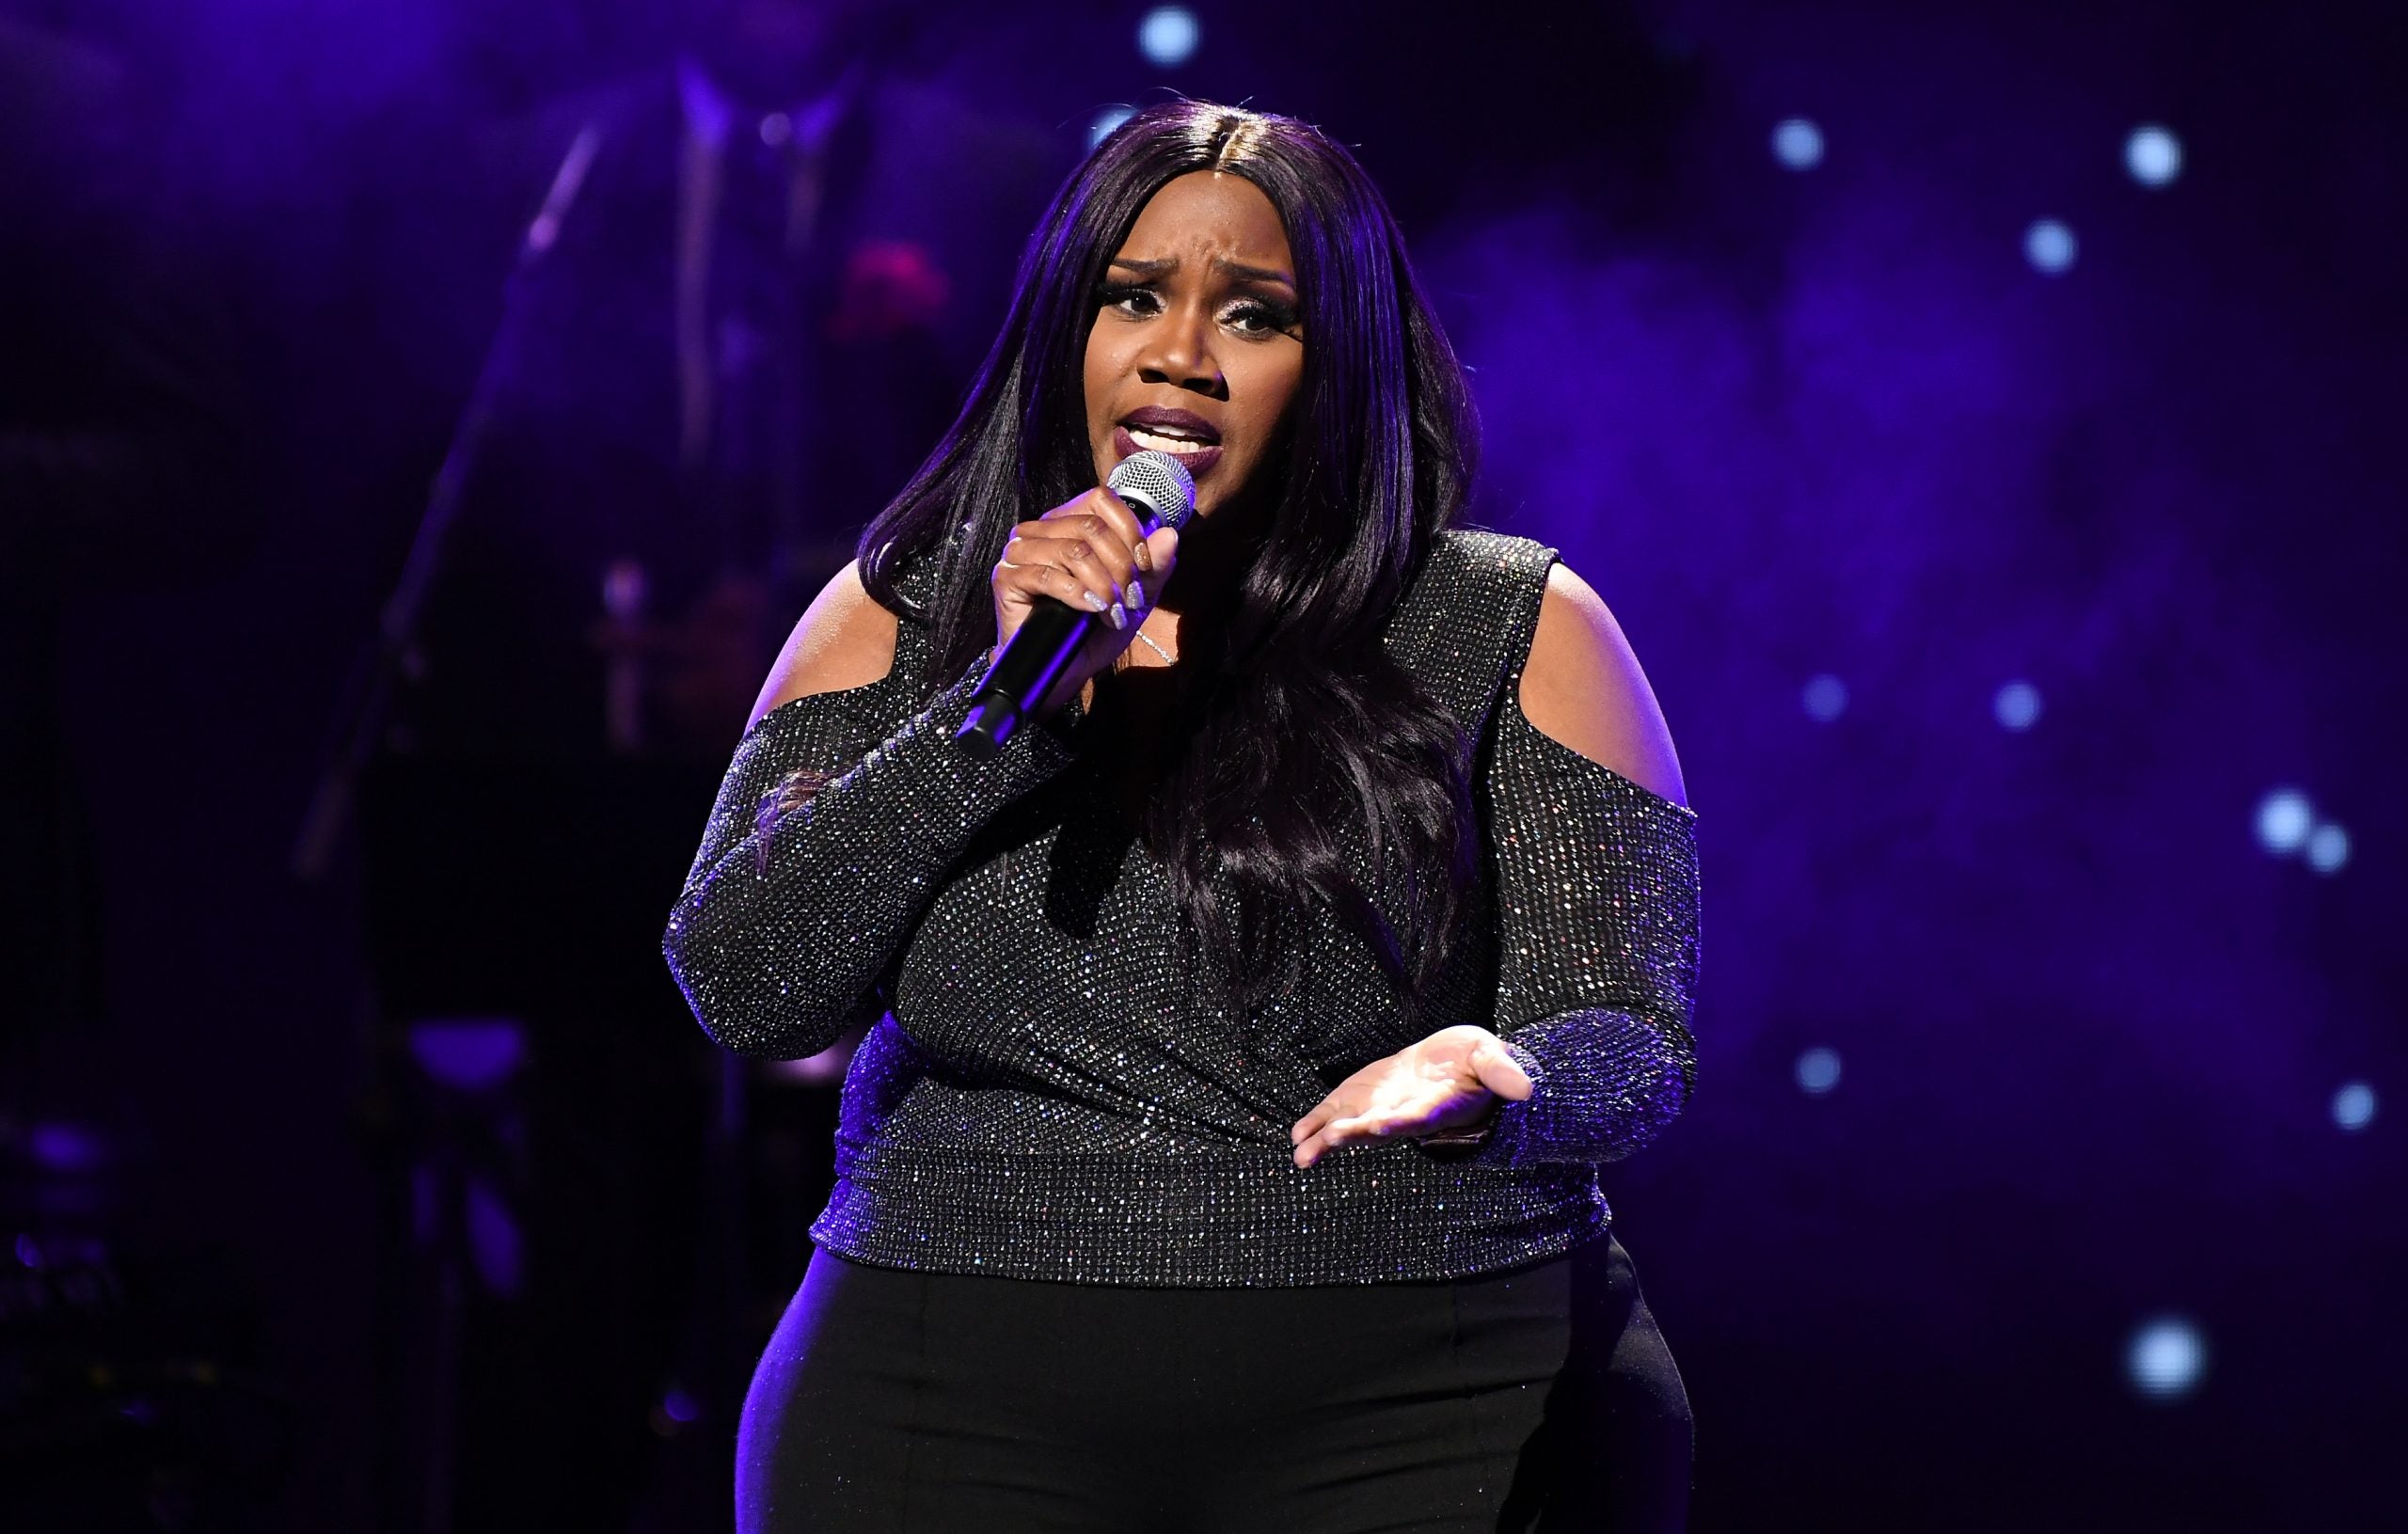 Singer Kelly Price Is Allegedly Missing; Legal Rep Says She’s Safe And Recovering From COVID-19